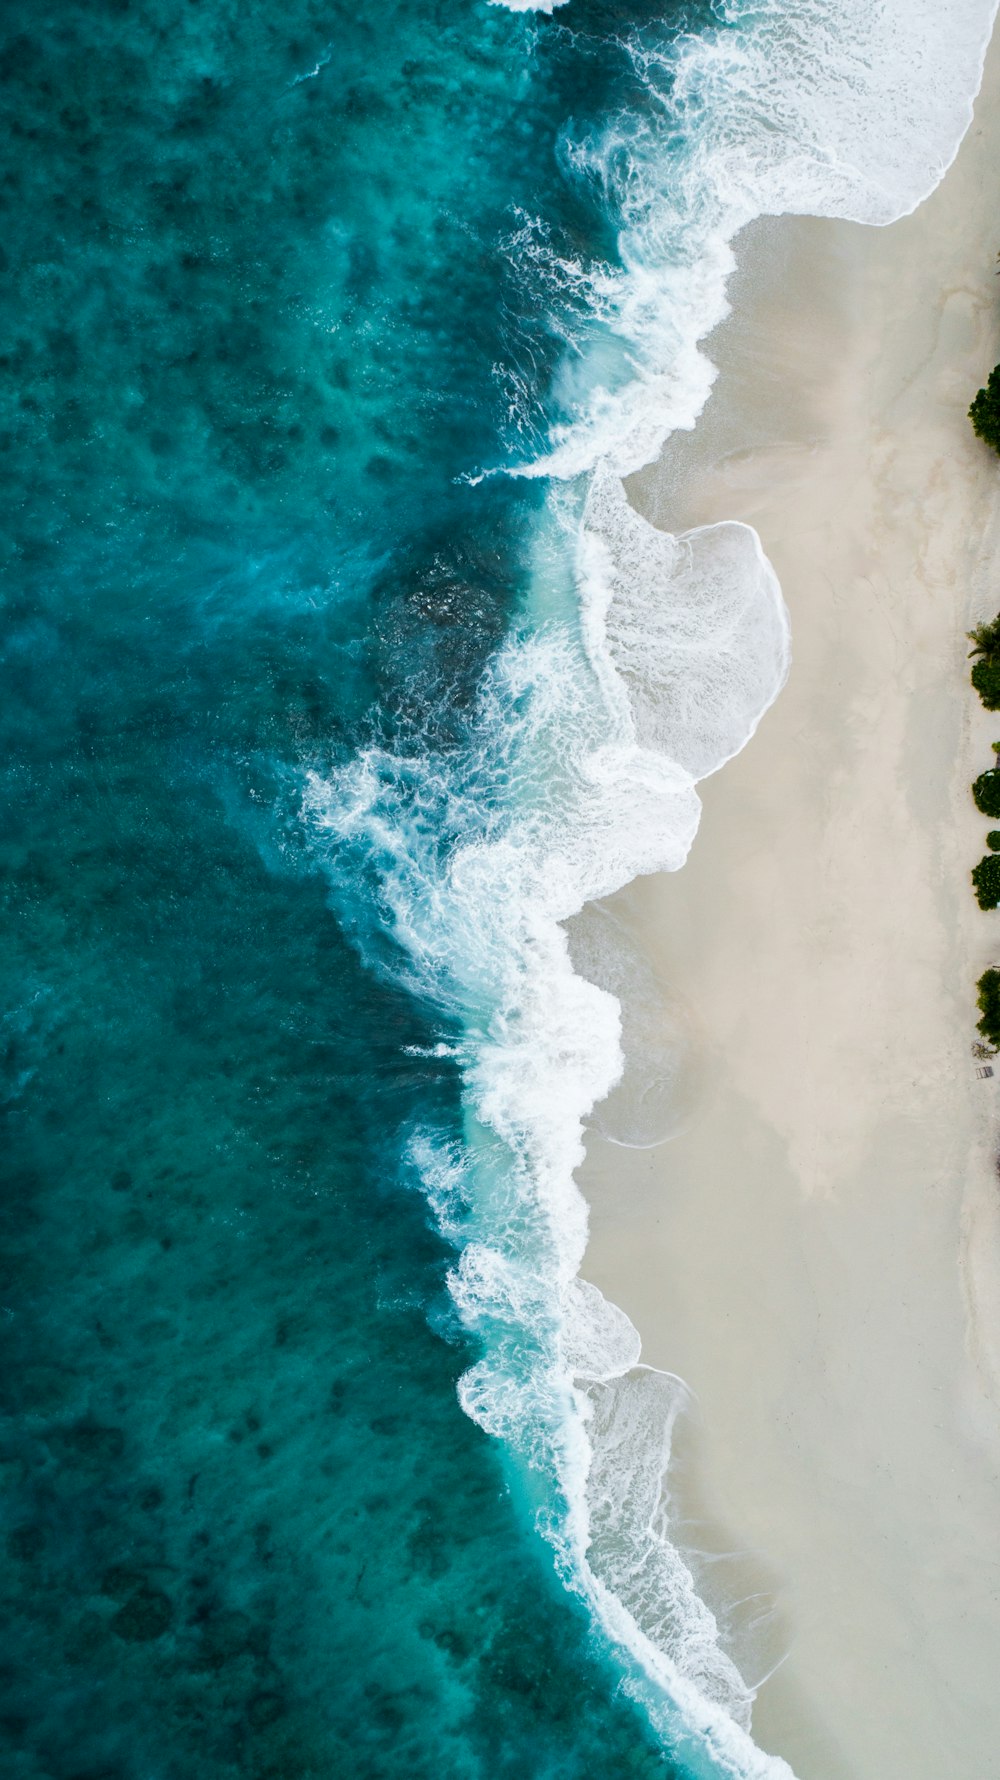 Premium AI Image  Beach wallpaper iphone photos and wallpapers. find the  best wallpapers and backgrounds for your iphone, tablet, android and  iphone. beach wallpaper, beach wallpaper, beach wall